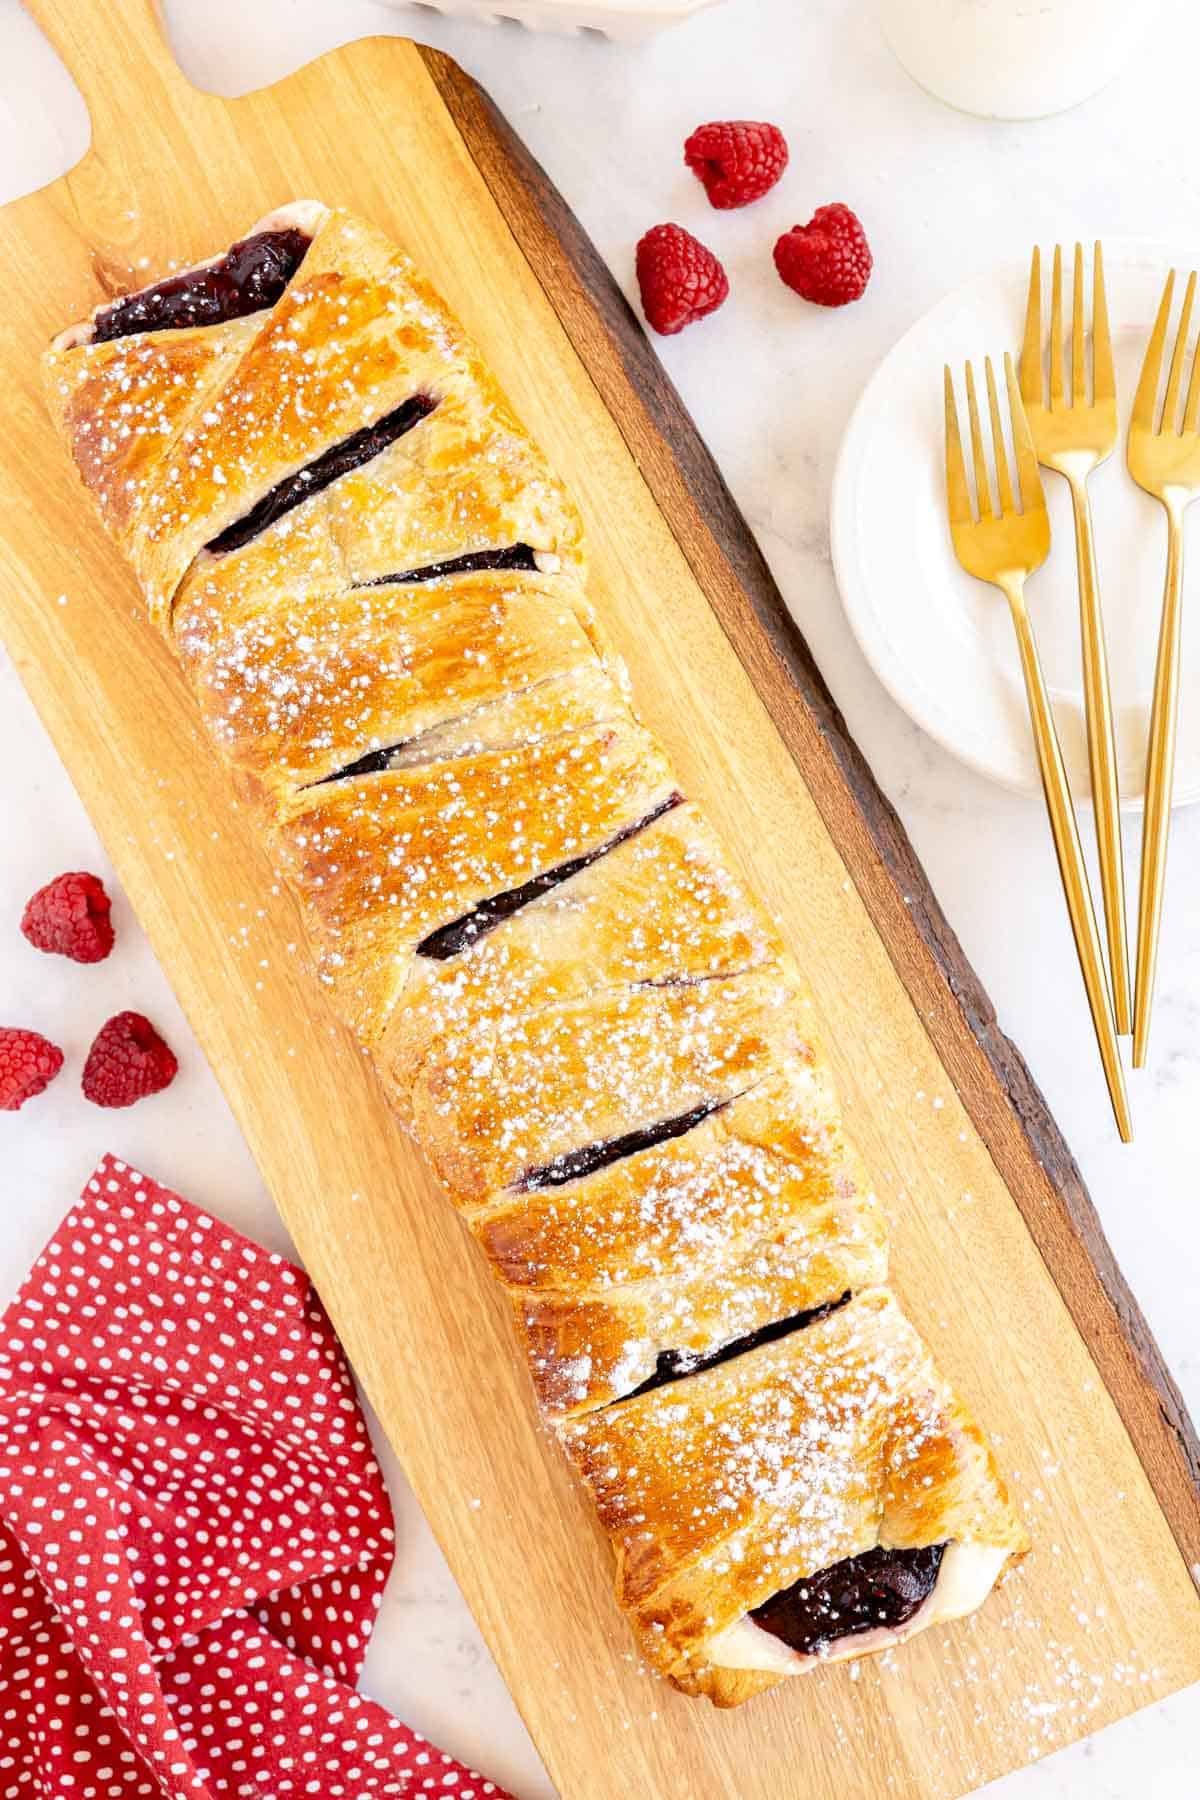 A raspberry-filled danish topped with powdered sugar on a cutting board.